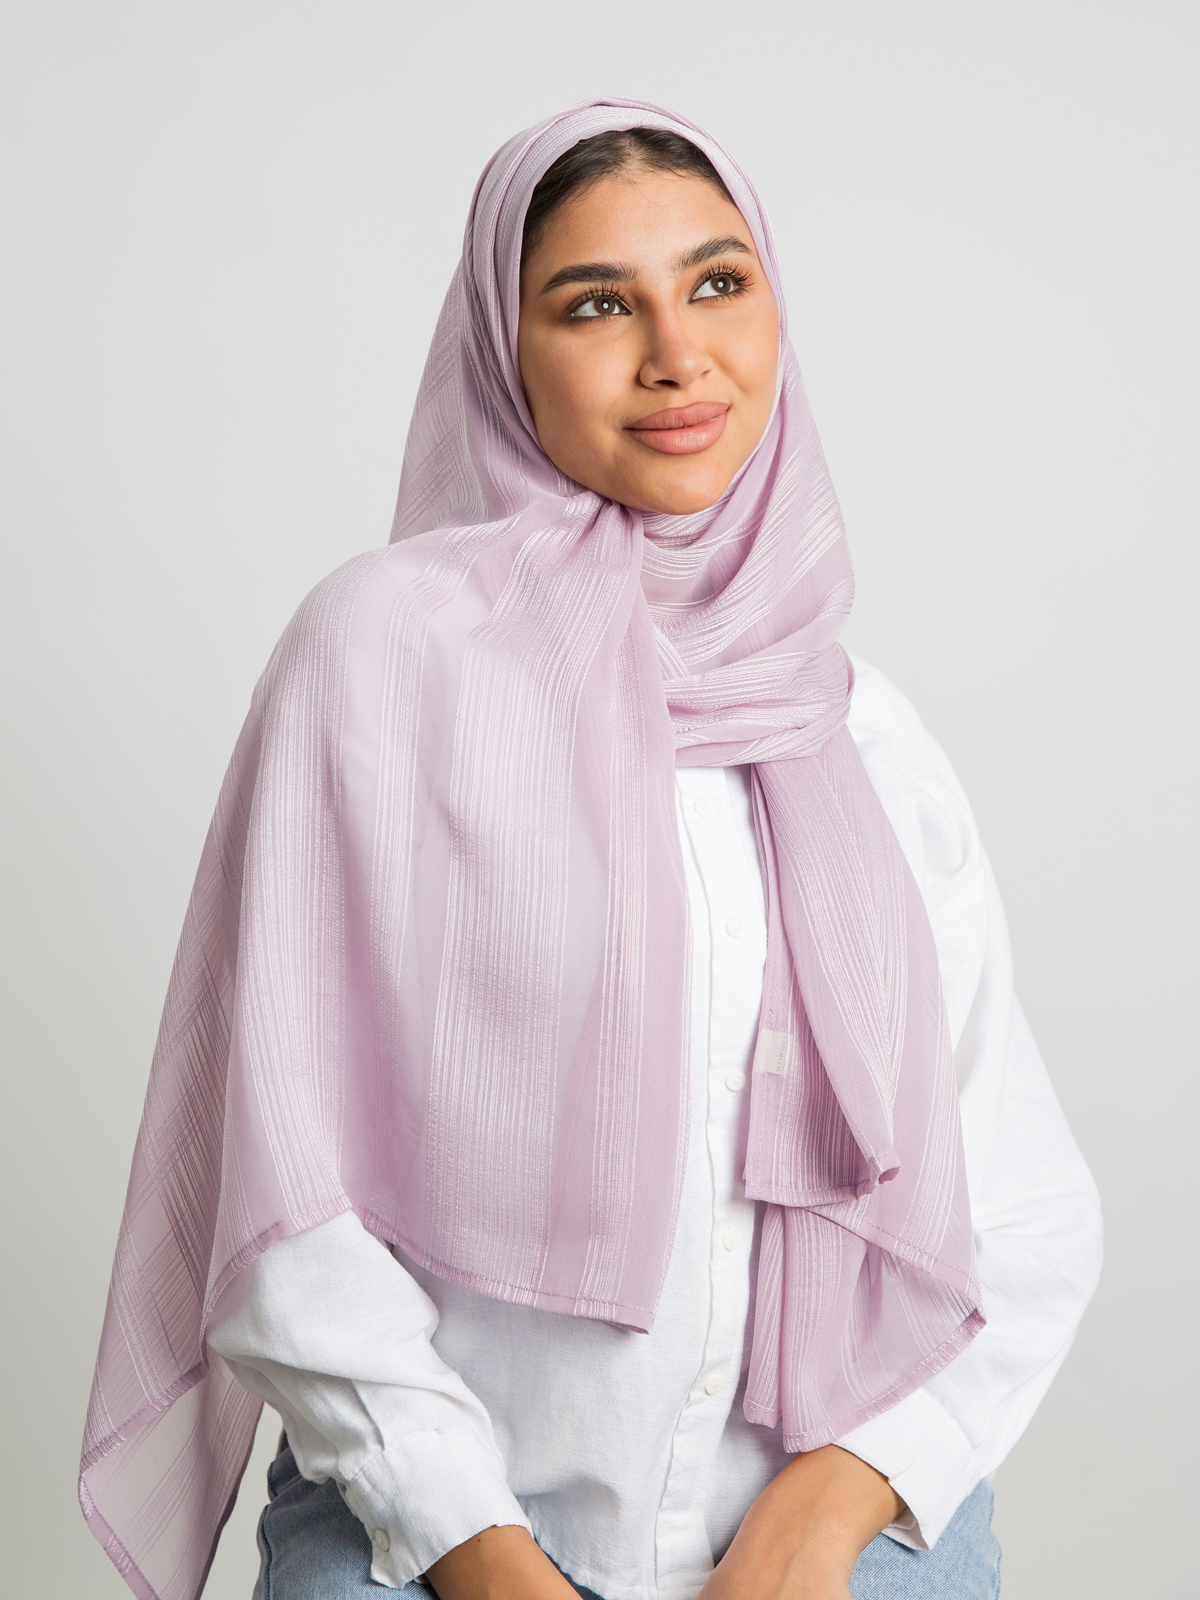 Lavender plain bundled stripes soft chiffon laser tarha by kaafmeem hijab for daily wear available in multiple colors